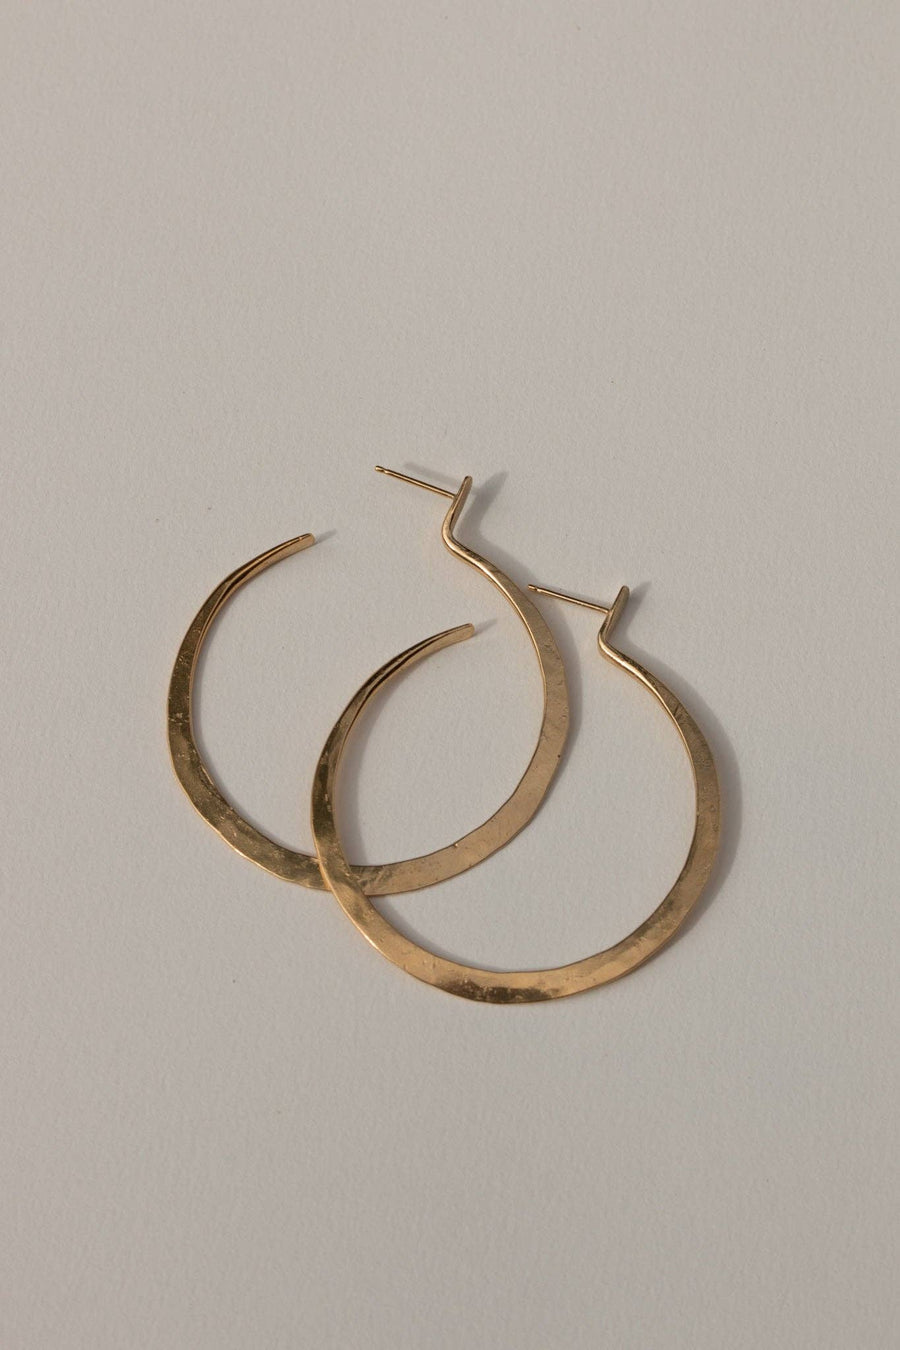  ‘Lenga’ Hoops (meaning ‘Create’ in Tumbuka) are handcrafted from brass and sterling silver posts coated in a luxuriously thick layer of 14k recycled gold 